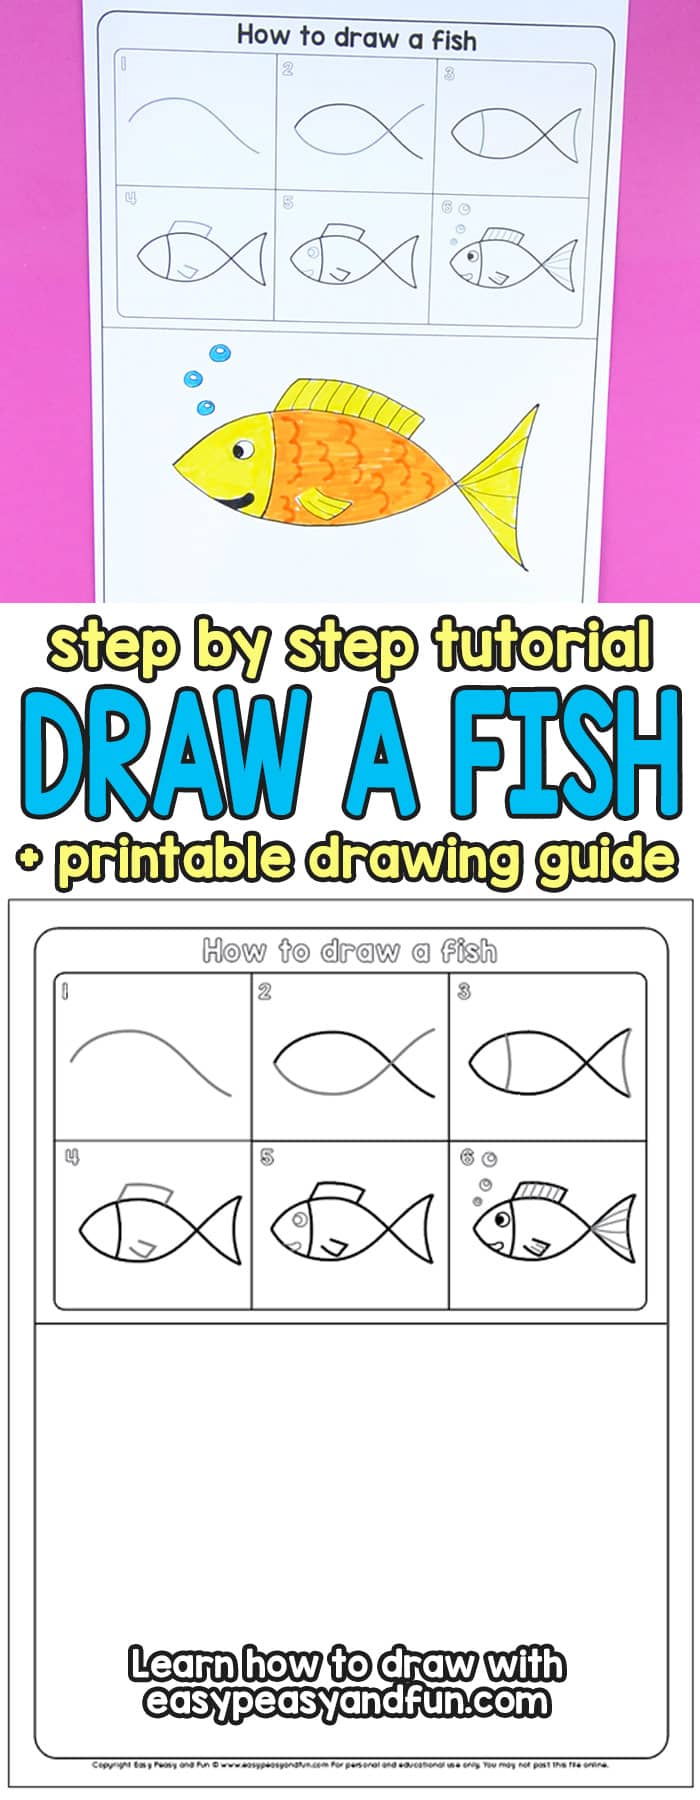 How To Draw A Fish Step By Step Tutorial For Kids Printable Easy Peasy And Fun Create a body of fish that is similar to a rugby ball. to draw a fish step by step tutorial